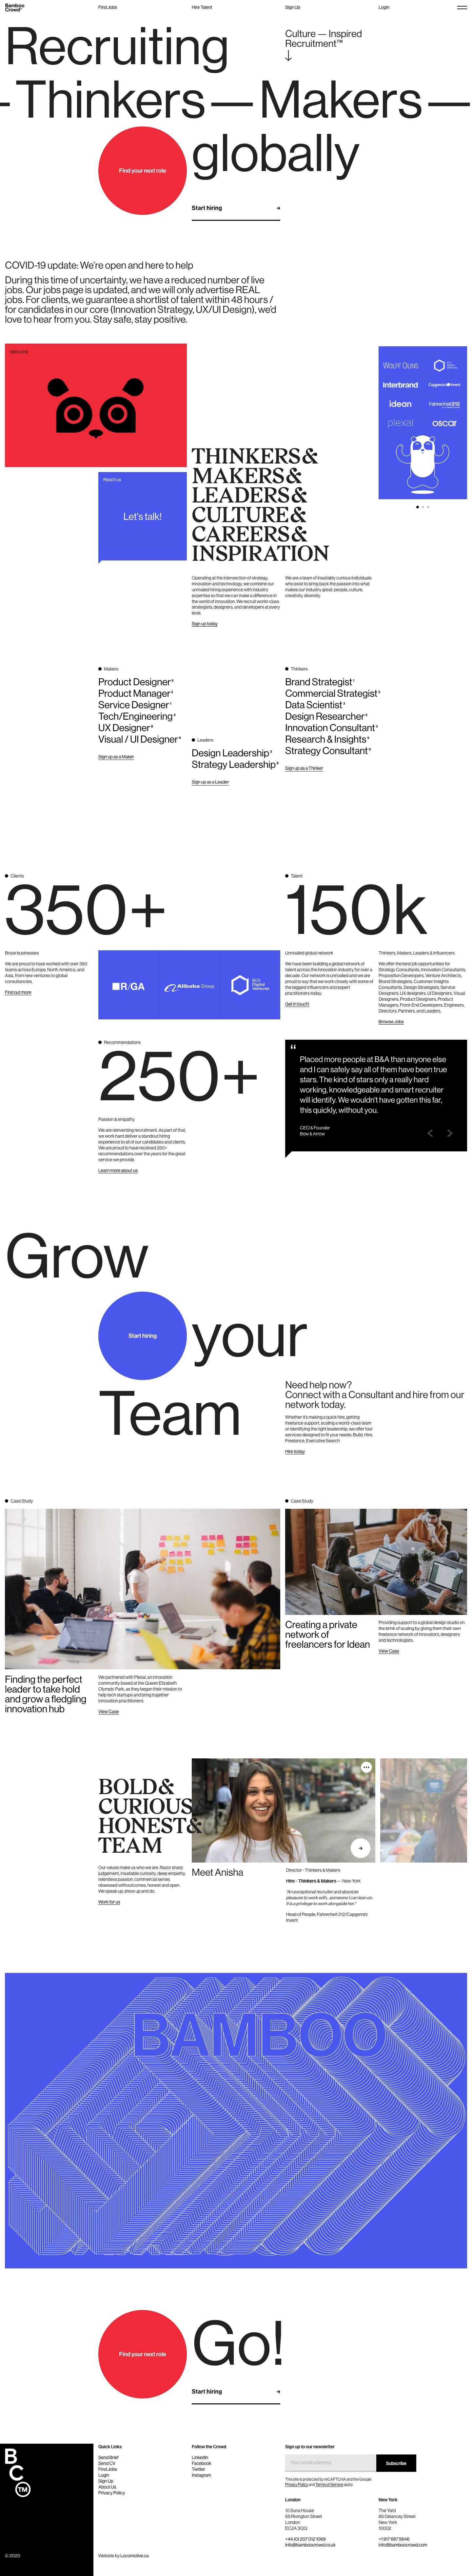 Bamboo Crowd Landing Page Example: We help businesses bring innovation to life by building teams of Thinkers, Makers, and Leaders. Find your next role in Strategy, Design, or Development.